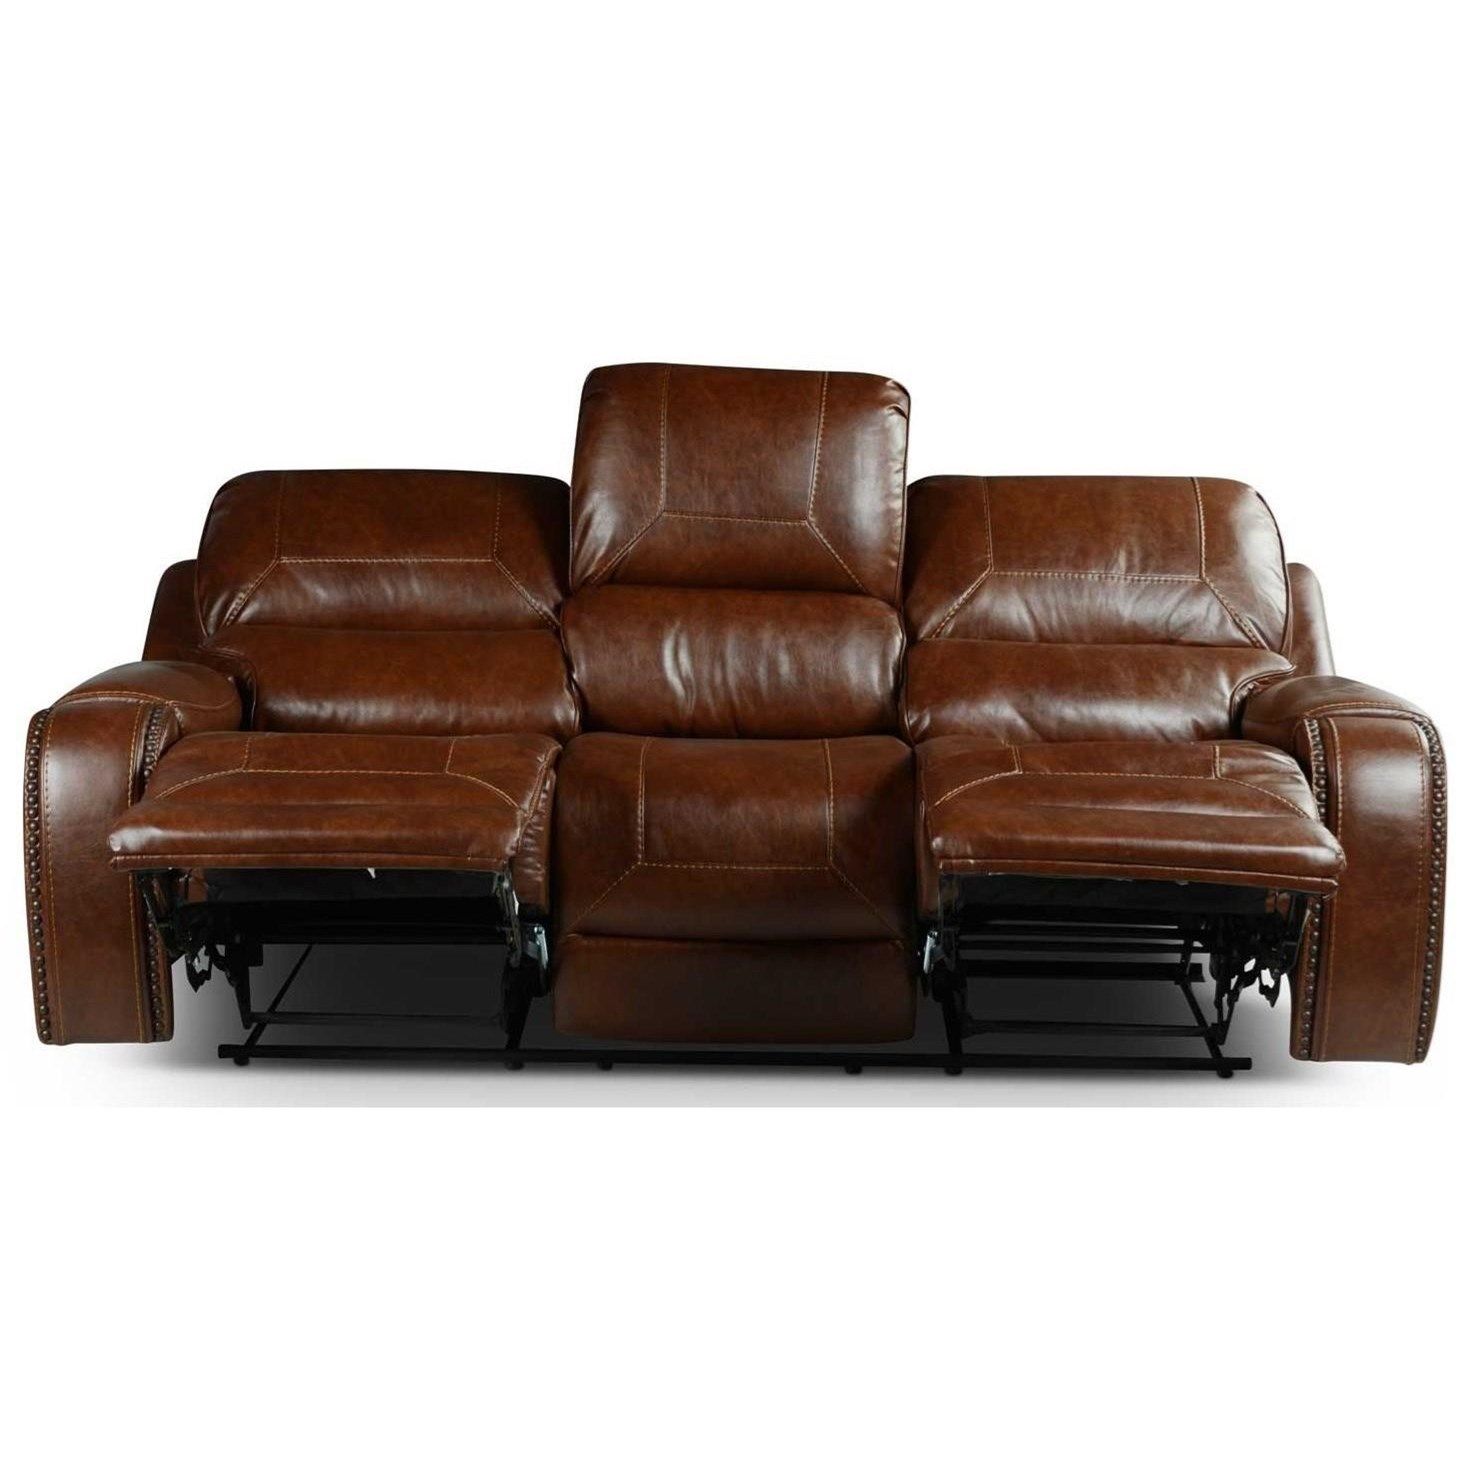 Steve Silver Keily Ke800S Manual Motion Recliner Sofa With Throughout Manual Reclining Sofas (View 2 of 15)